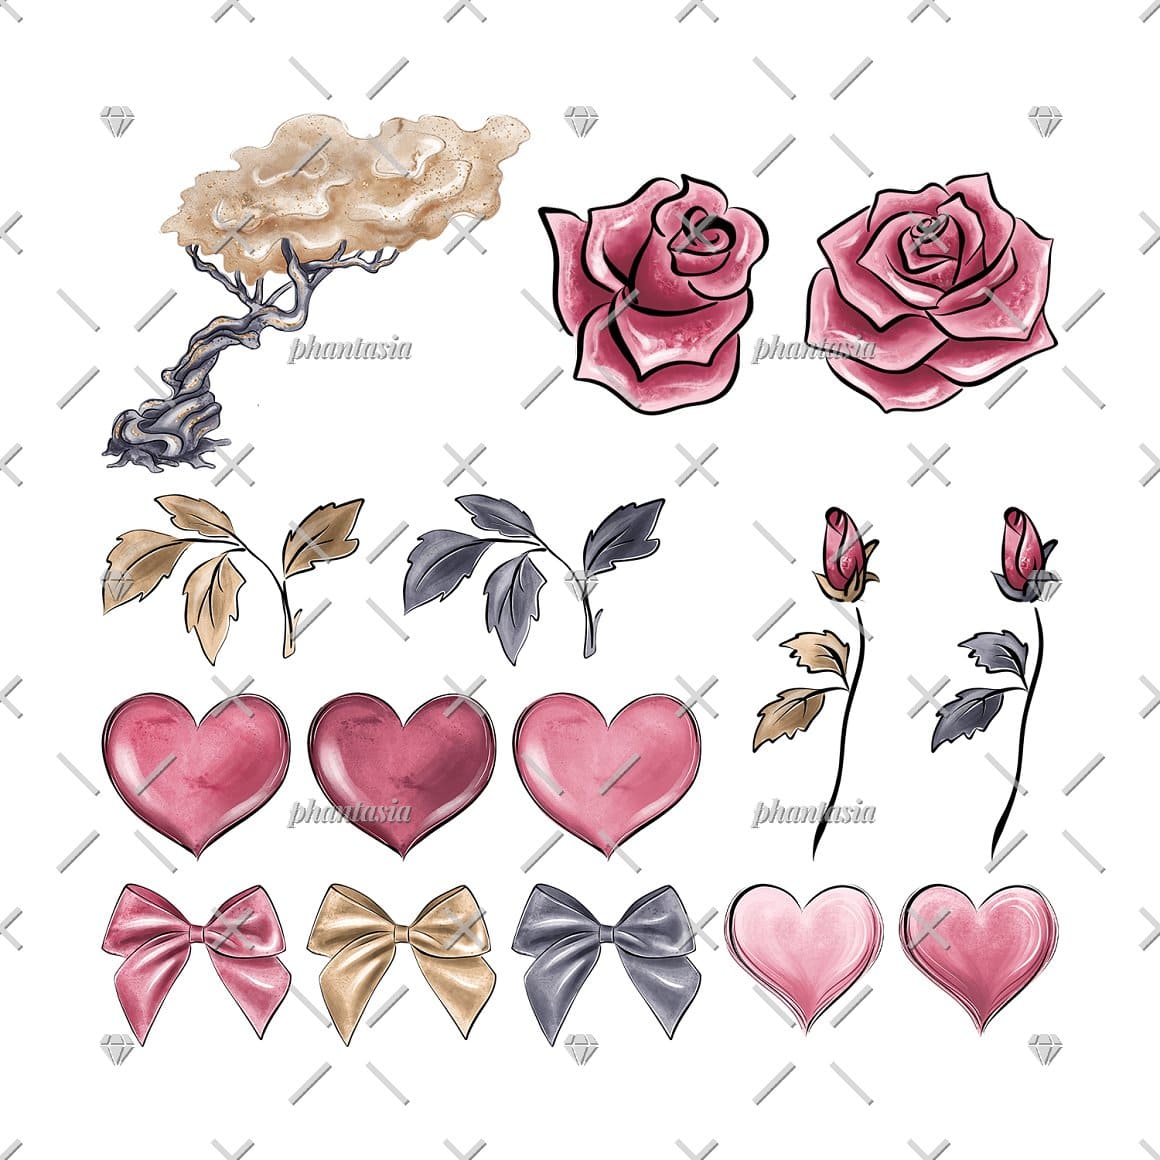 Images of bows, hearts, roses and other romantic things.